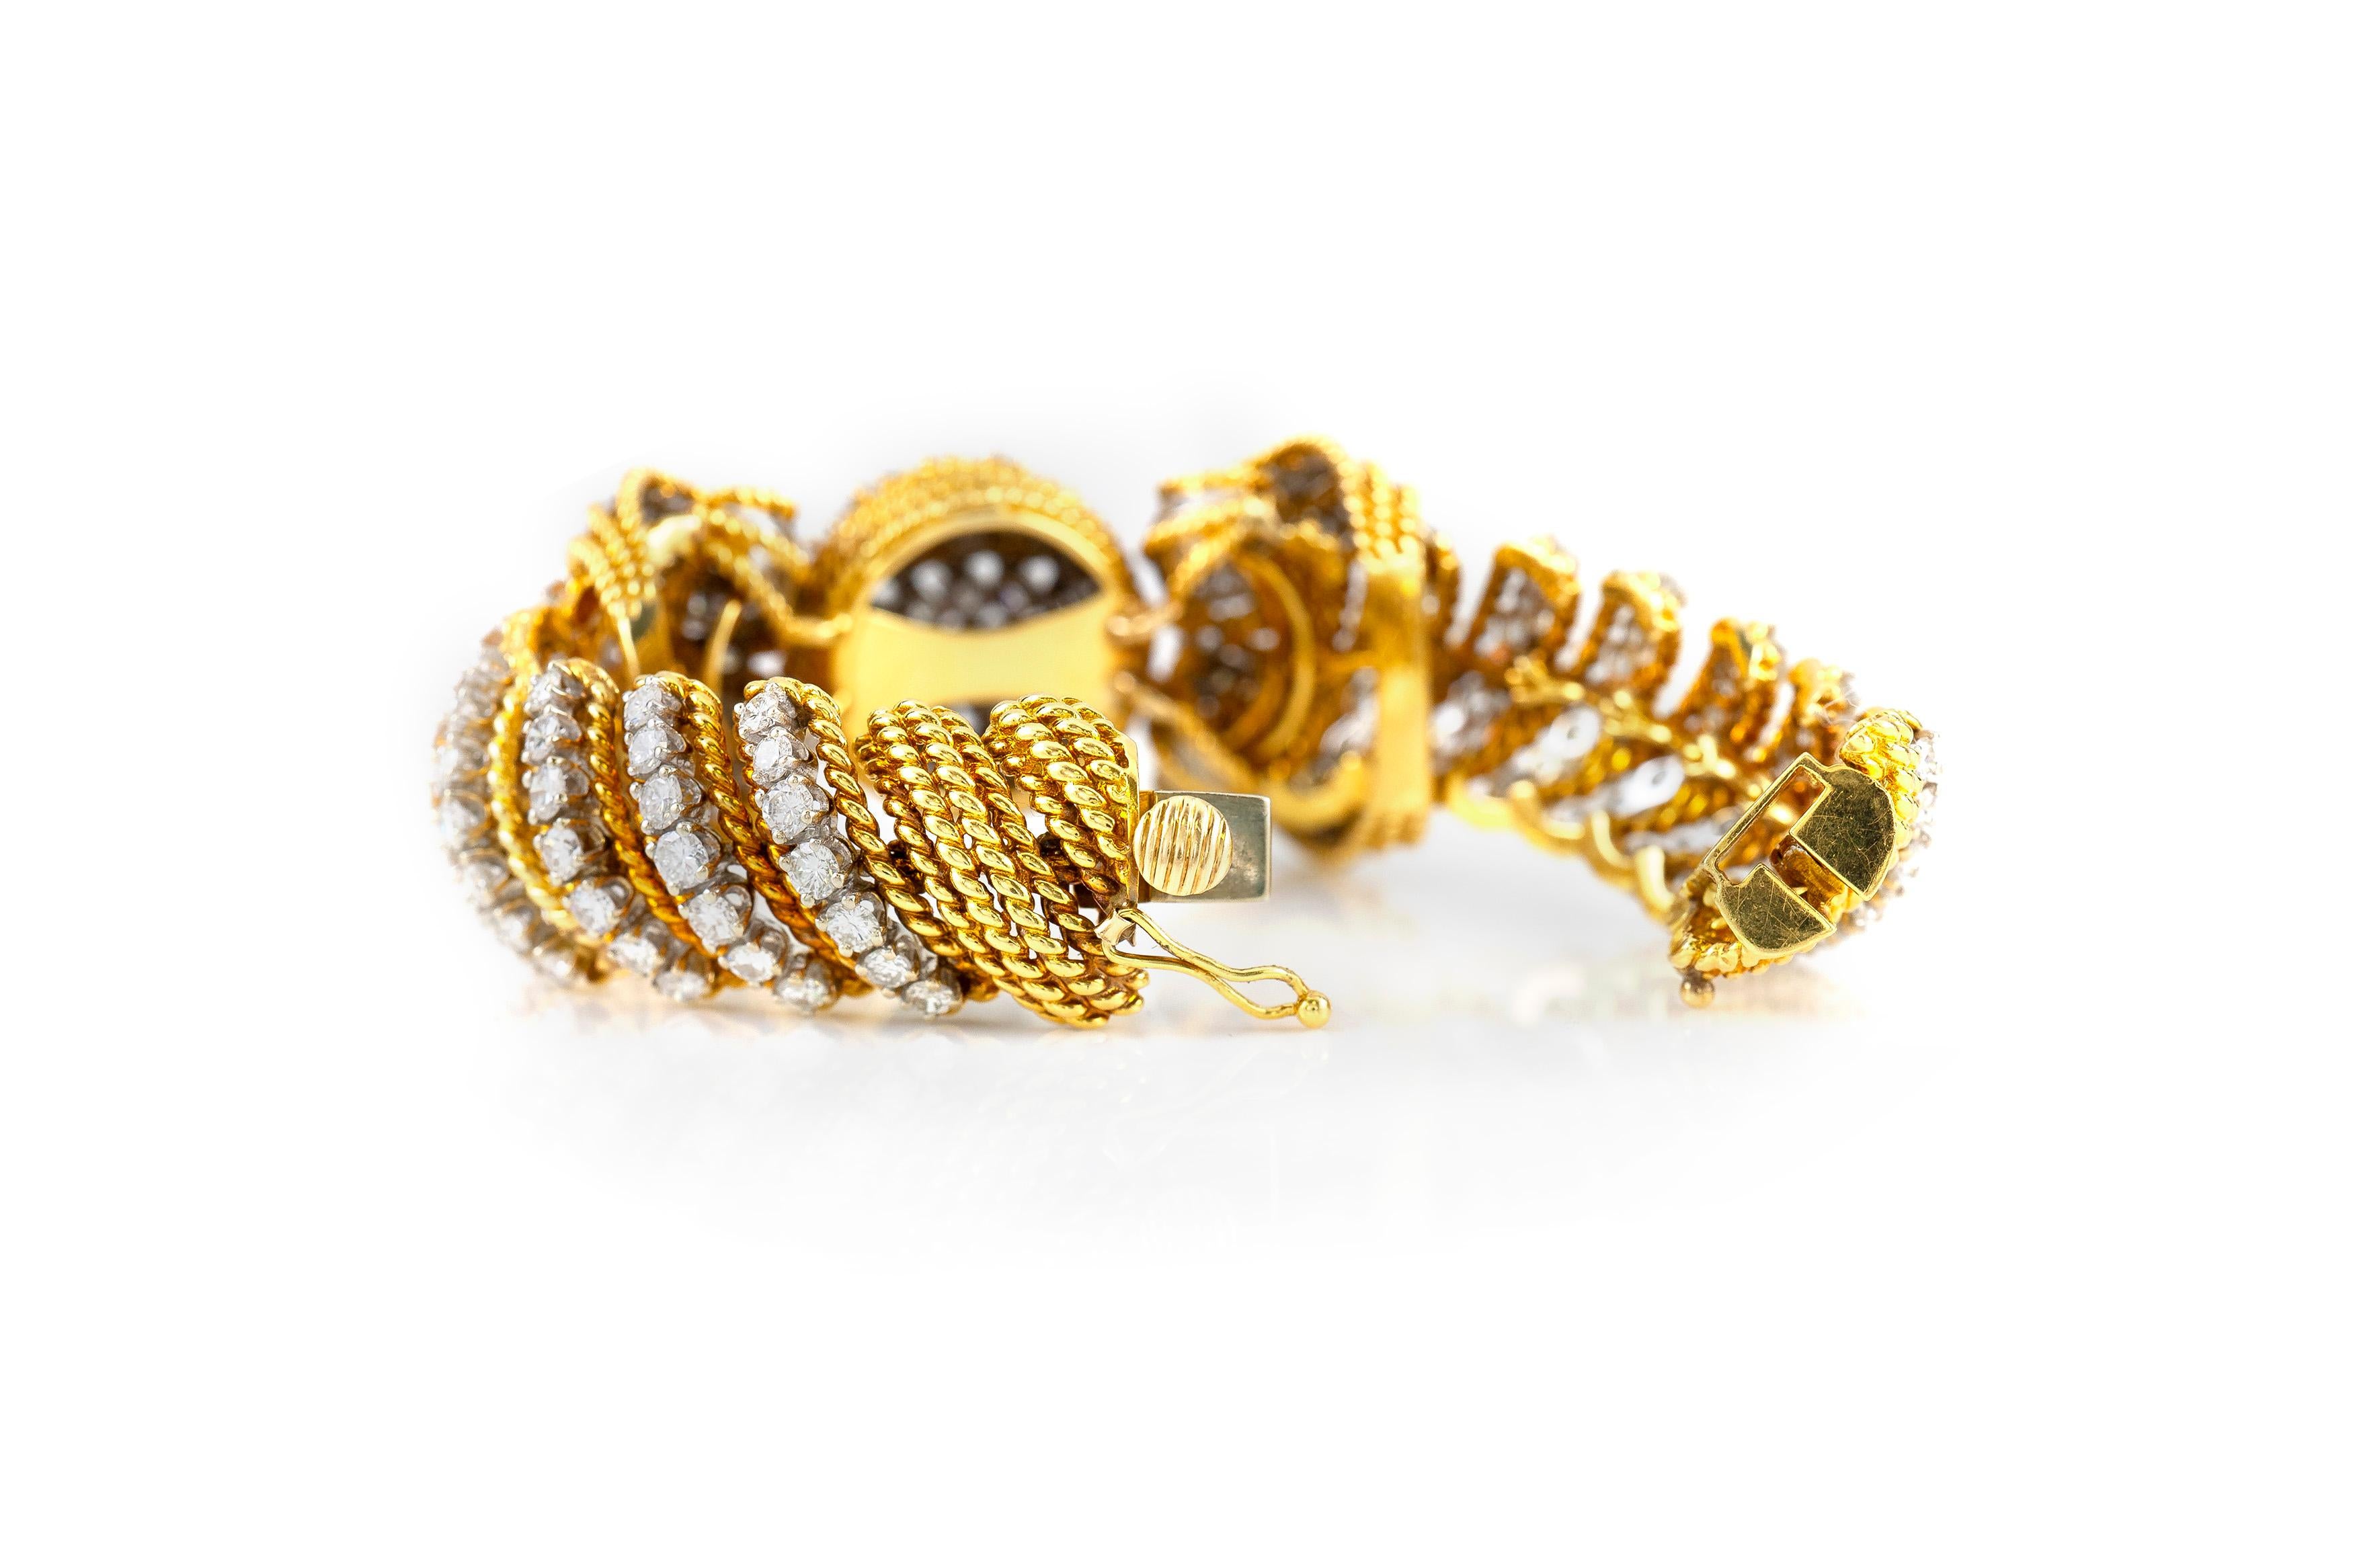 The bracelet is finely crafted in 18k yellow gold with diamonds weighing approximately total of 16.00 carat.